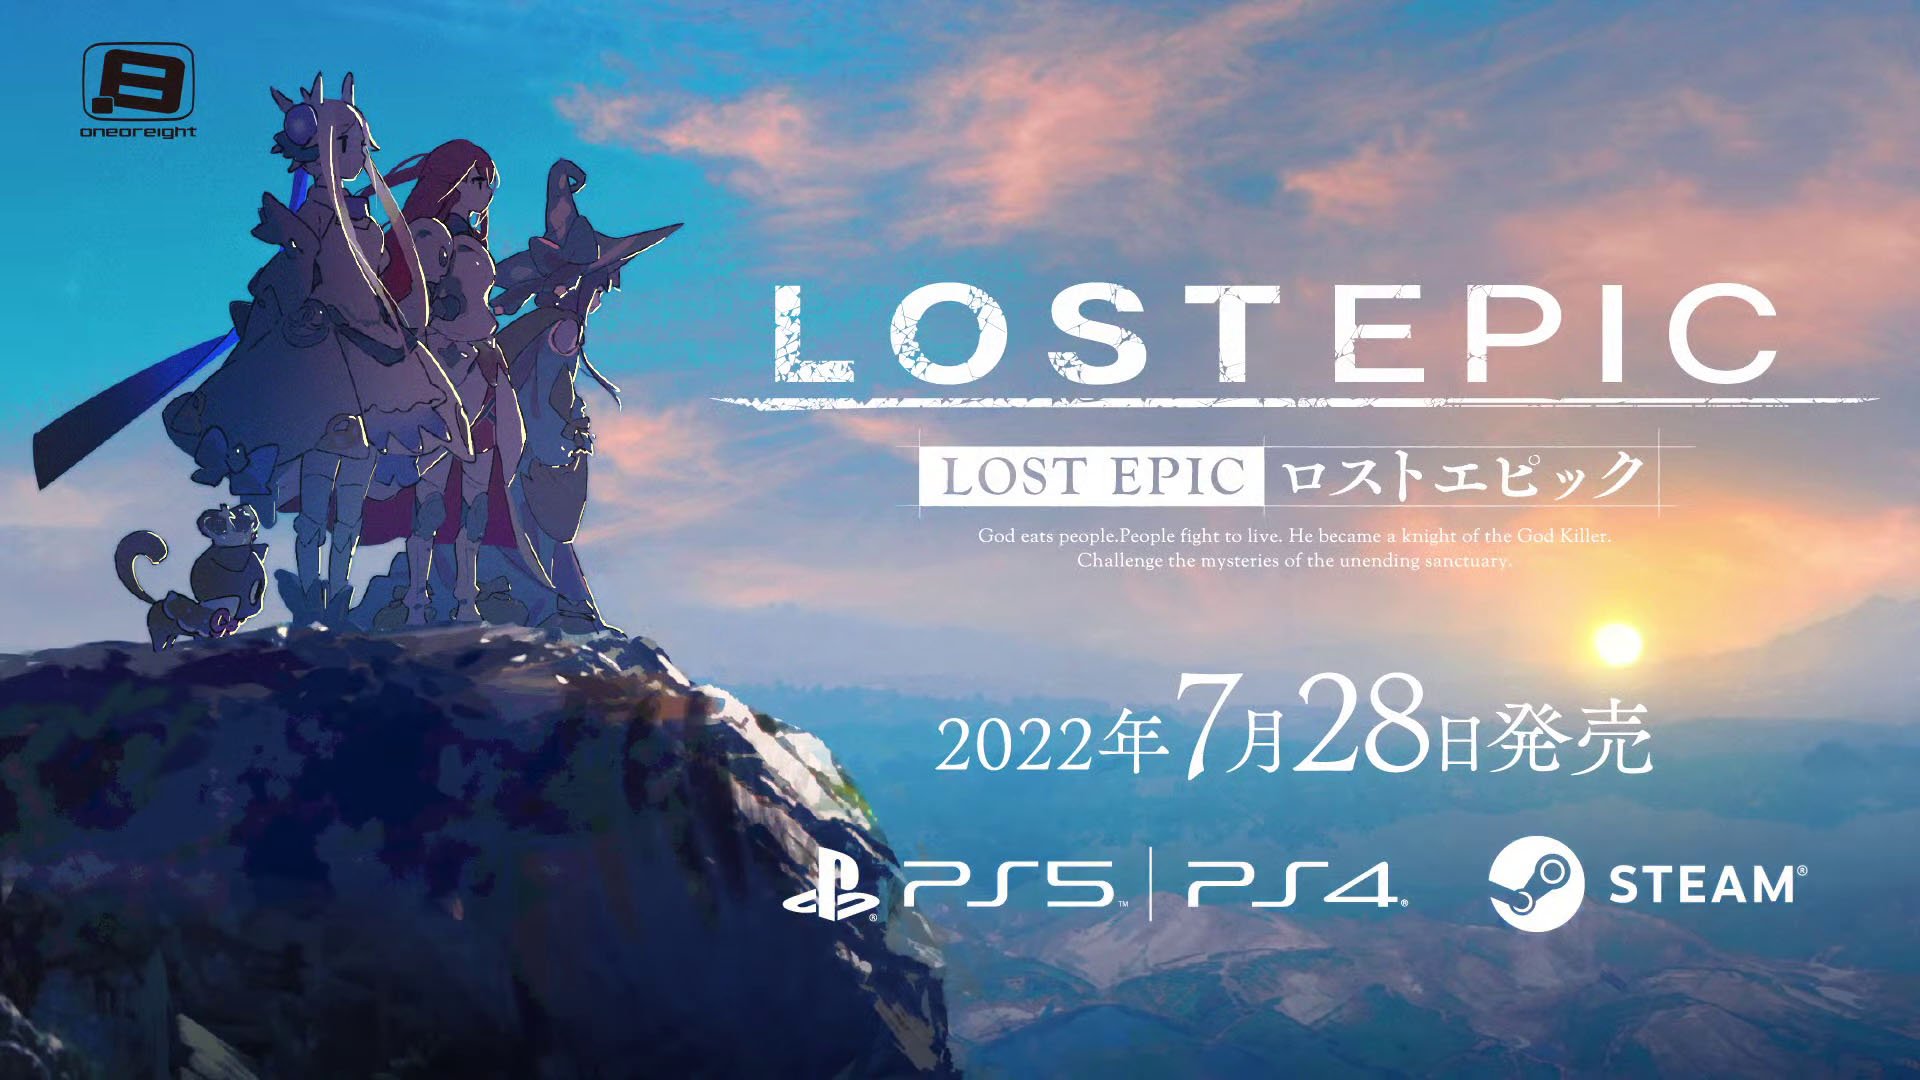 #
      LOST EPIC launches July 28 for PS5, PS4, and PC